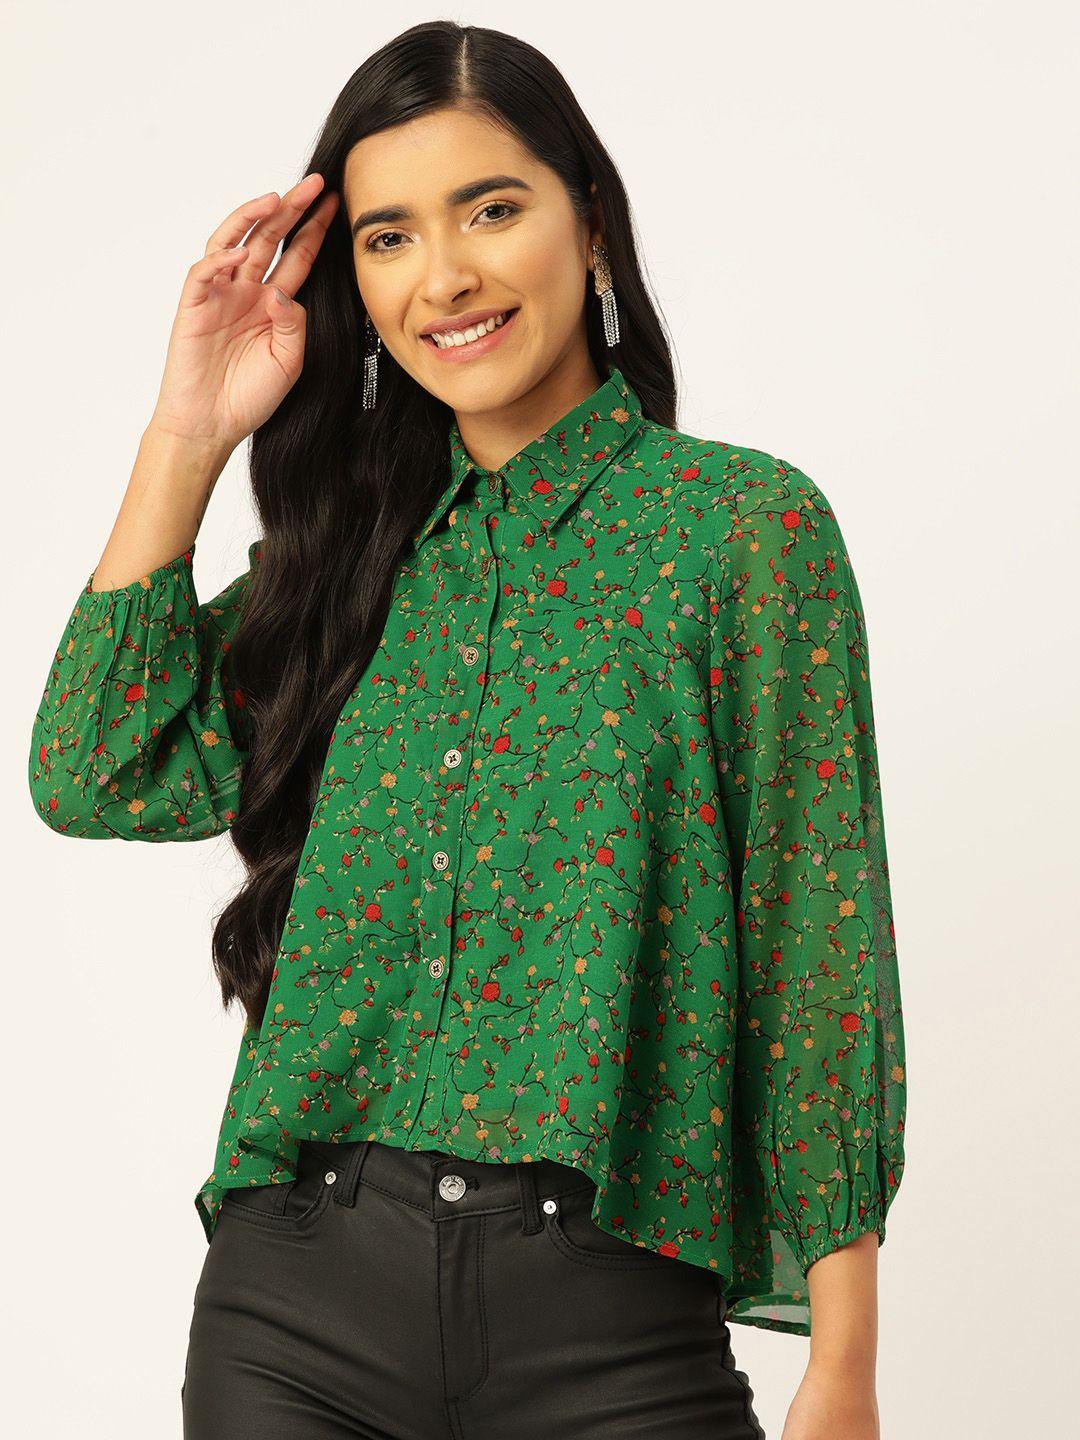 slenor floral print puff sleeves shirt style top